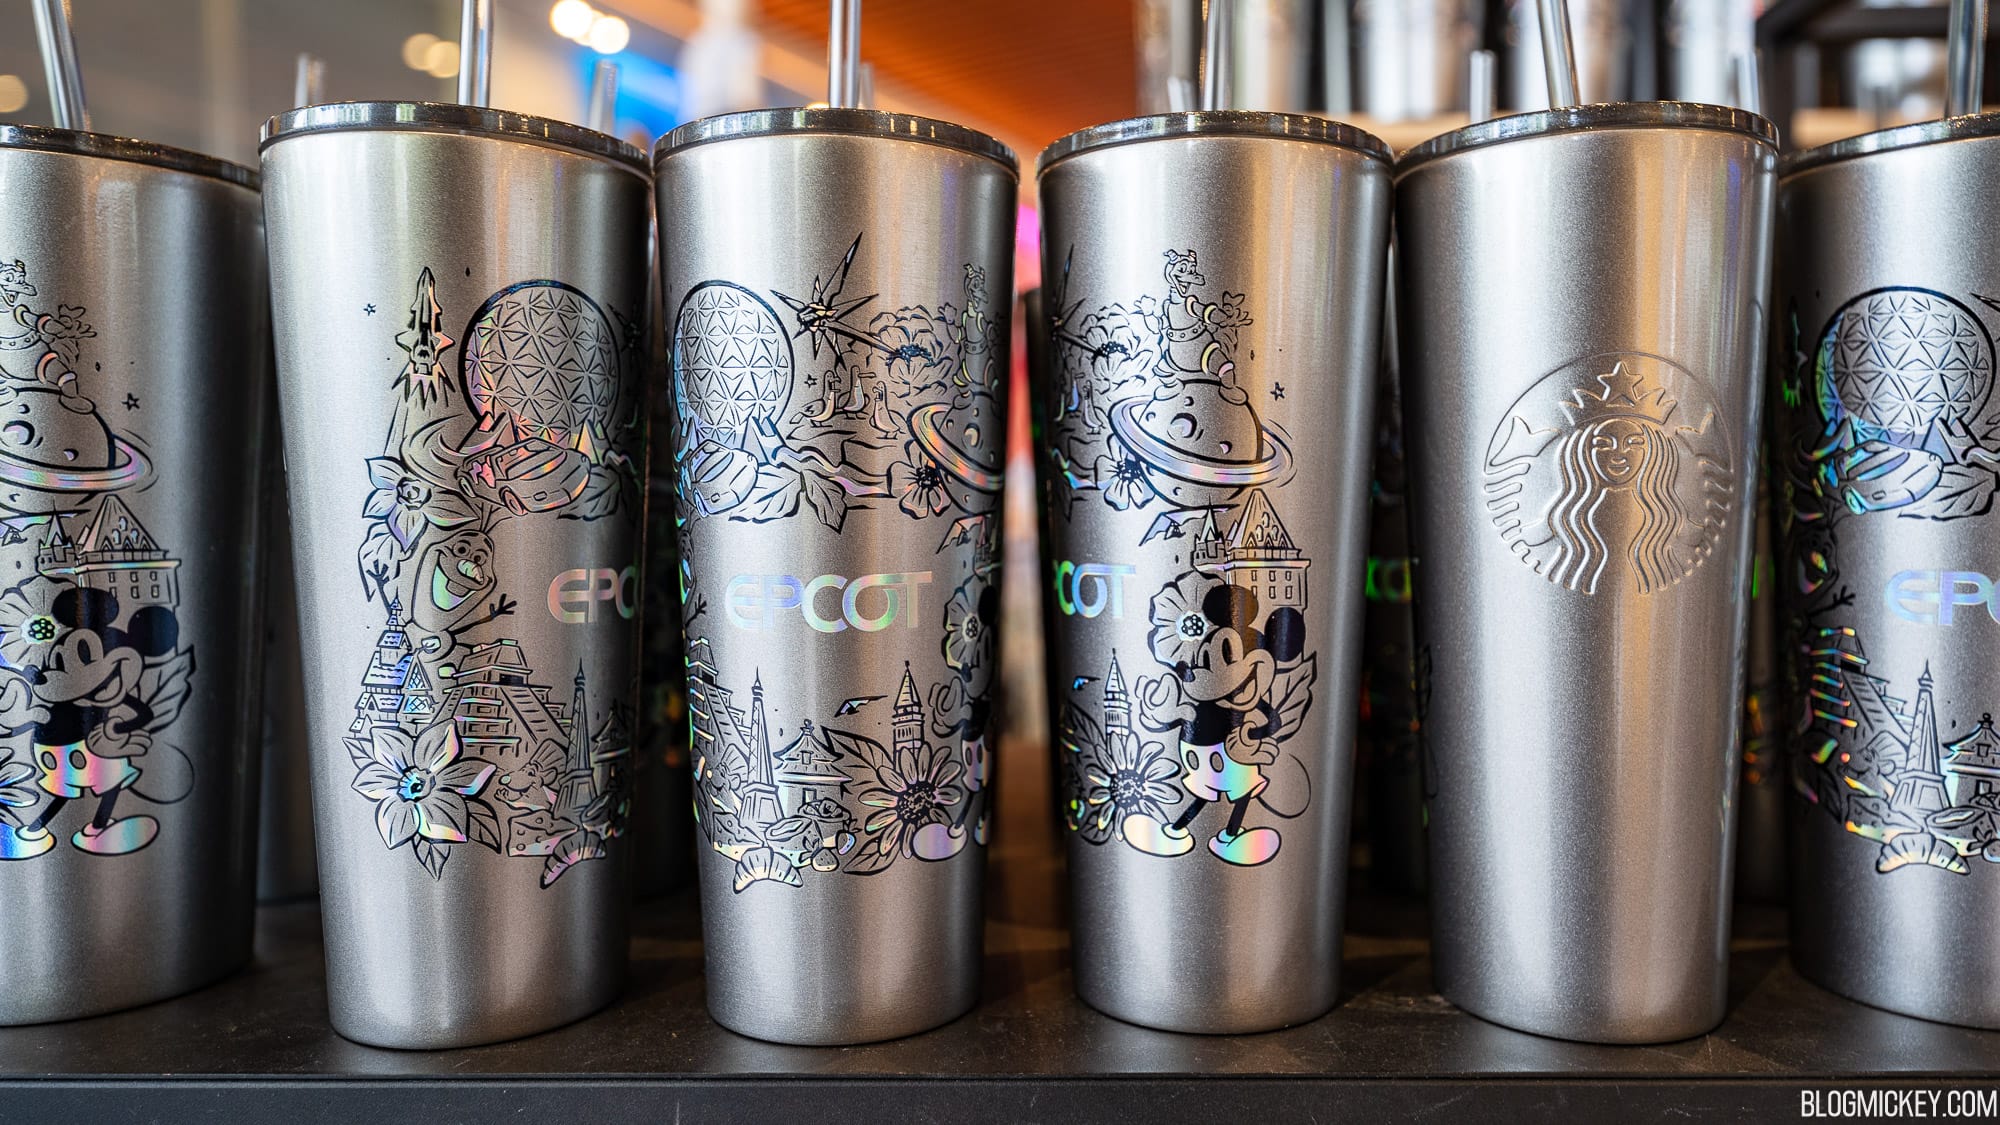 Custom Starbucks Tumblers - Available Products - Puzzle Piece Creations